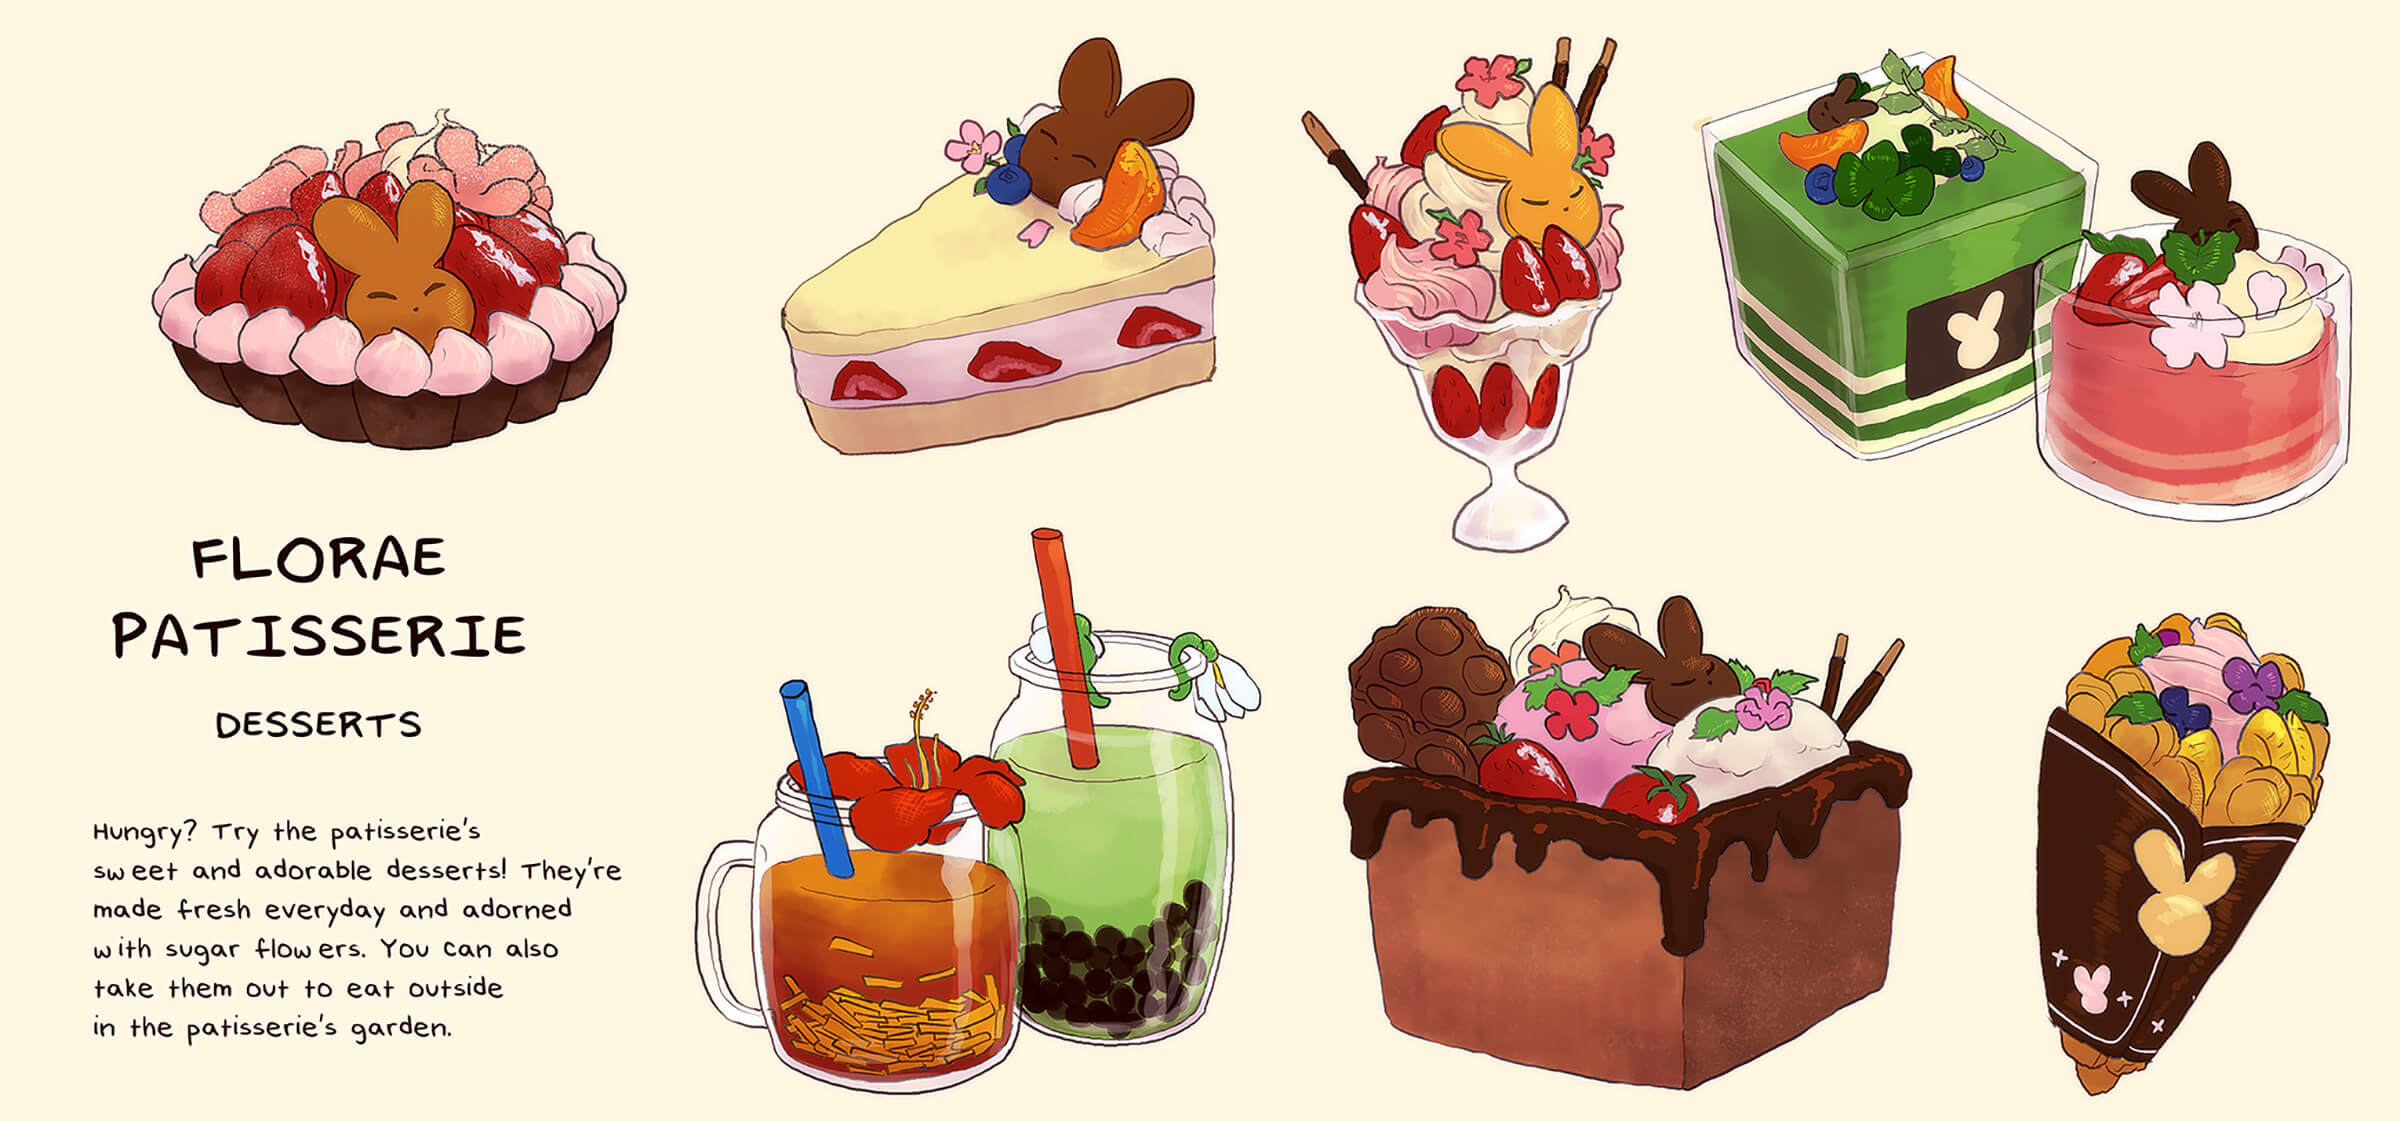 Many colorful drinks and desserts